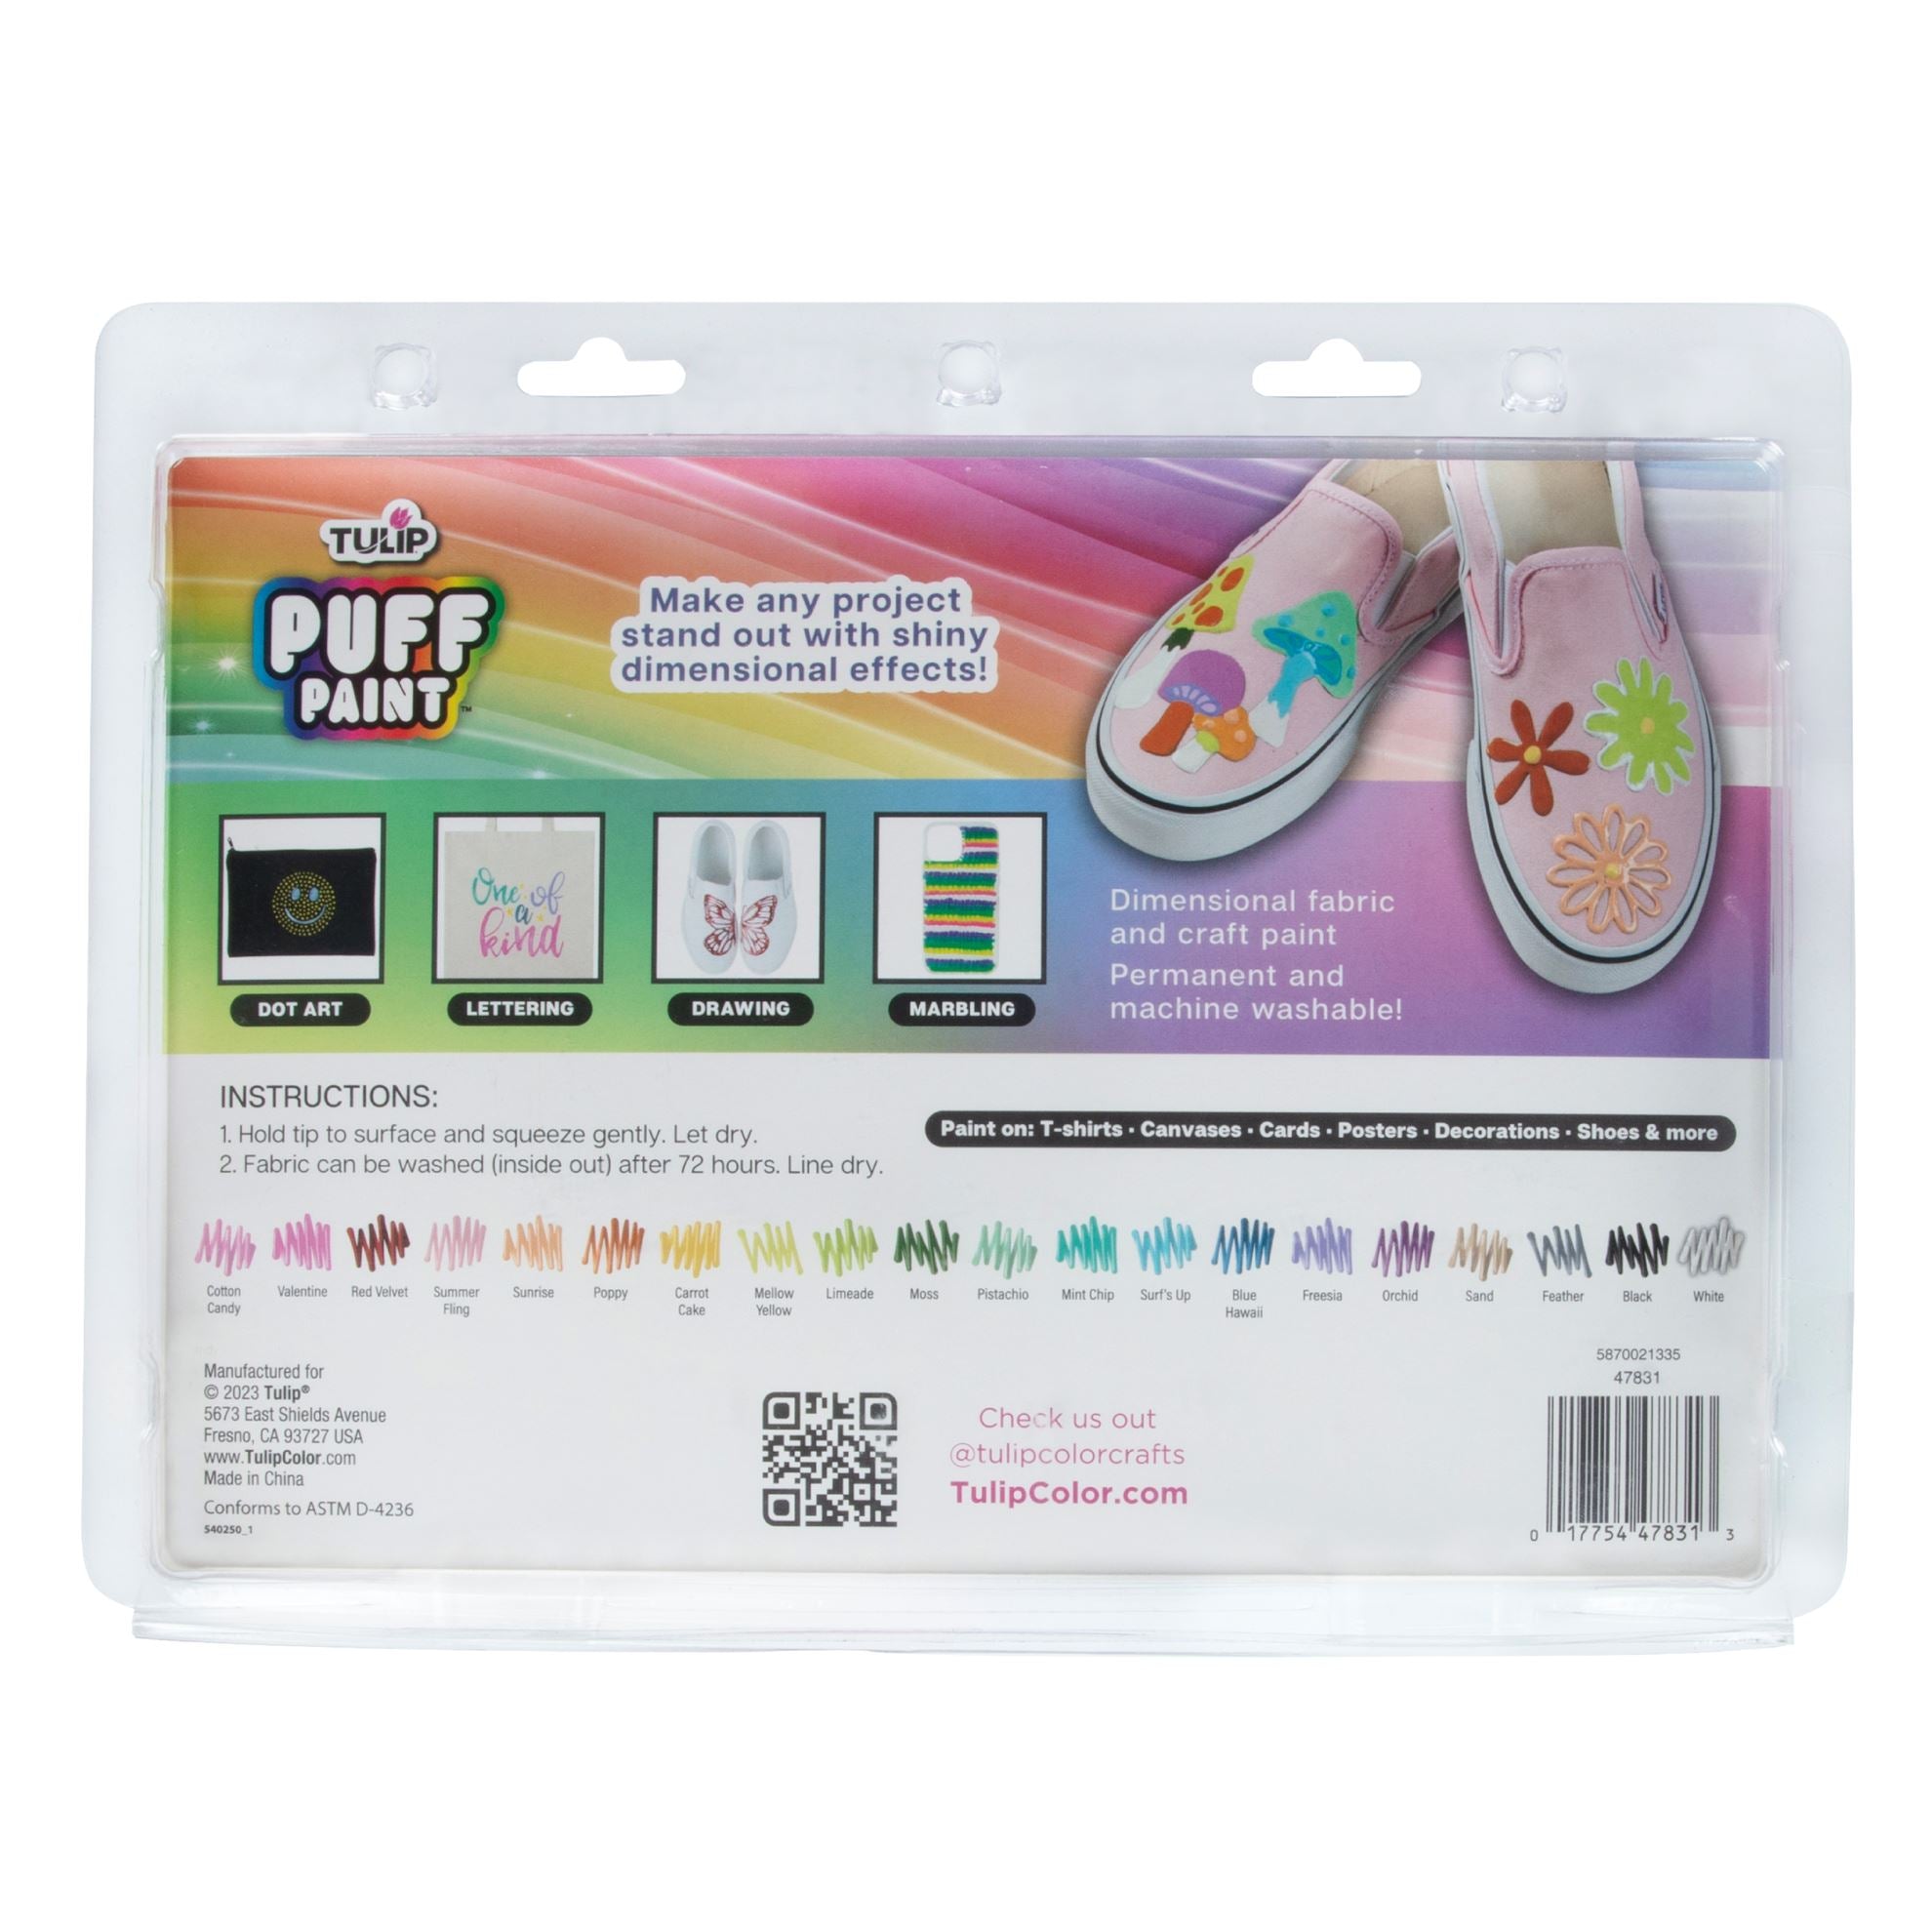 Puffy 3D Puff Paint, Fabric and Multi-Surface, Neon Geen, 1 fl oz 